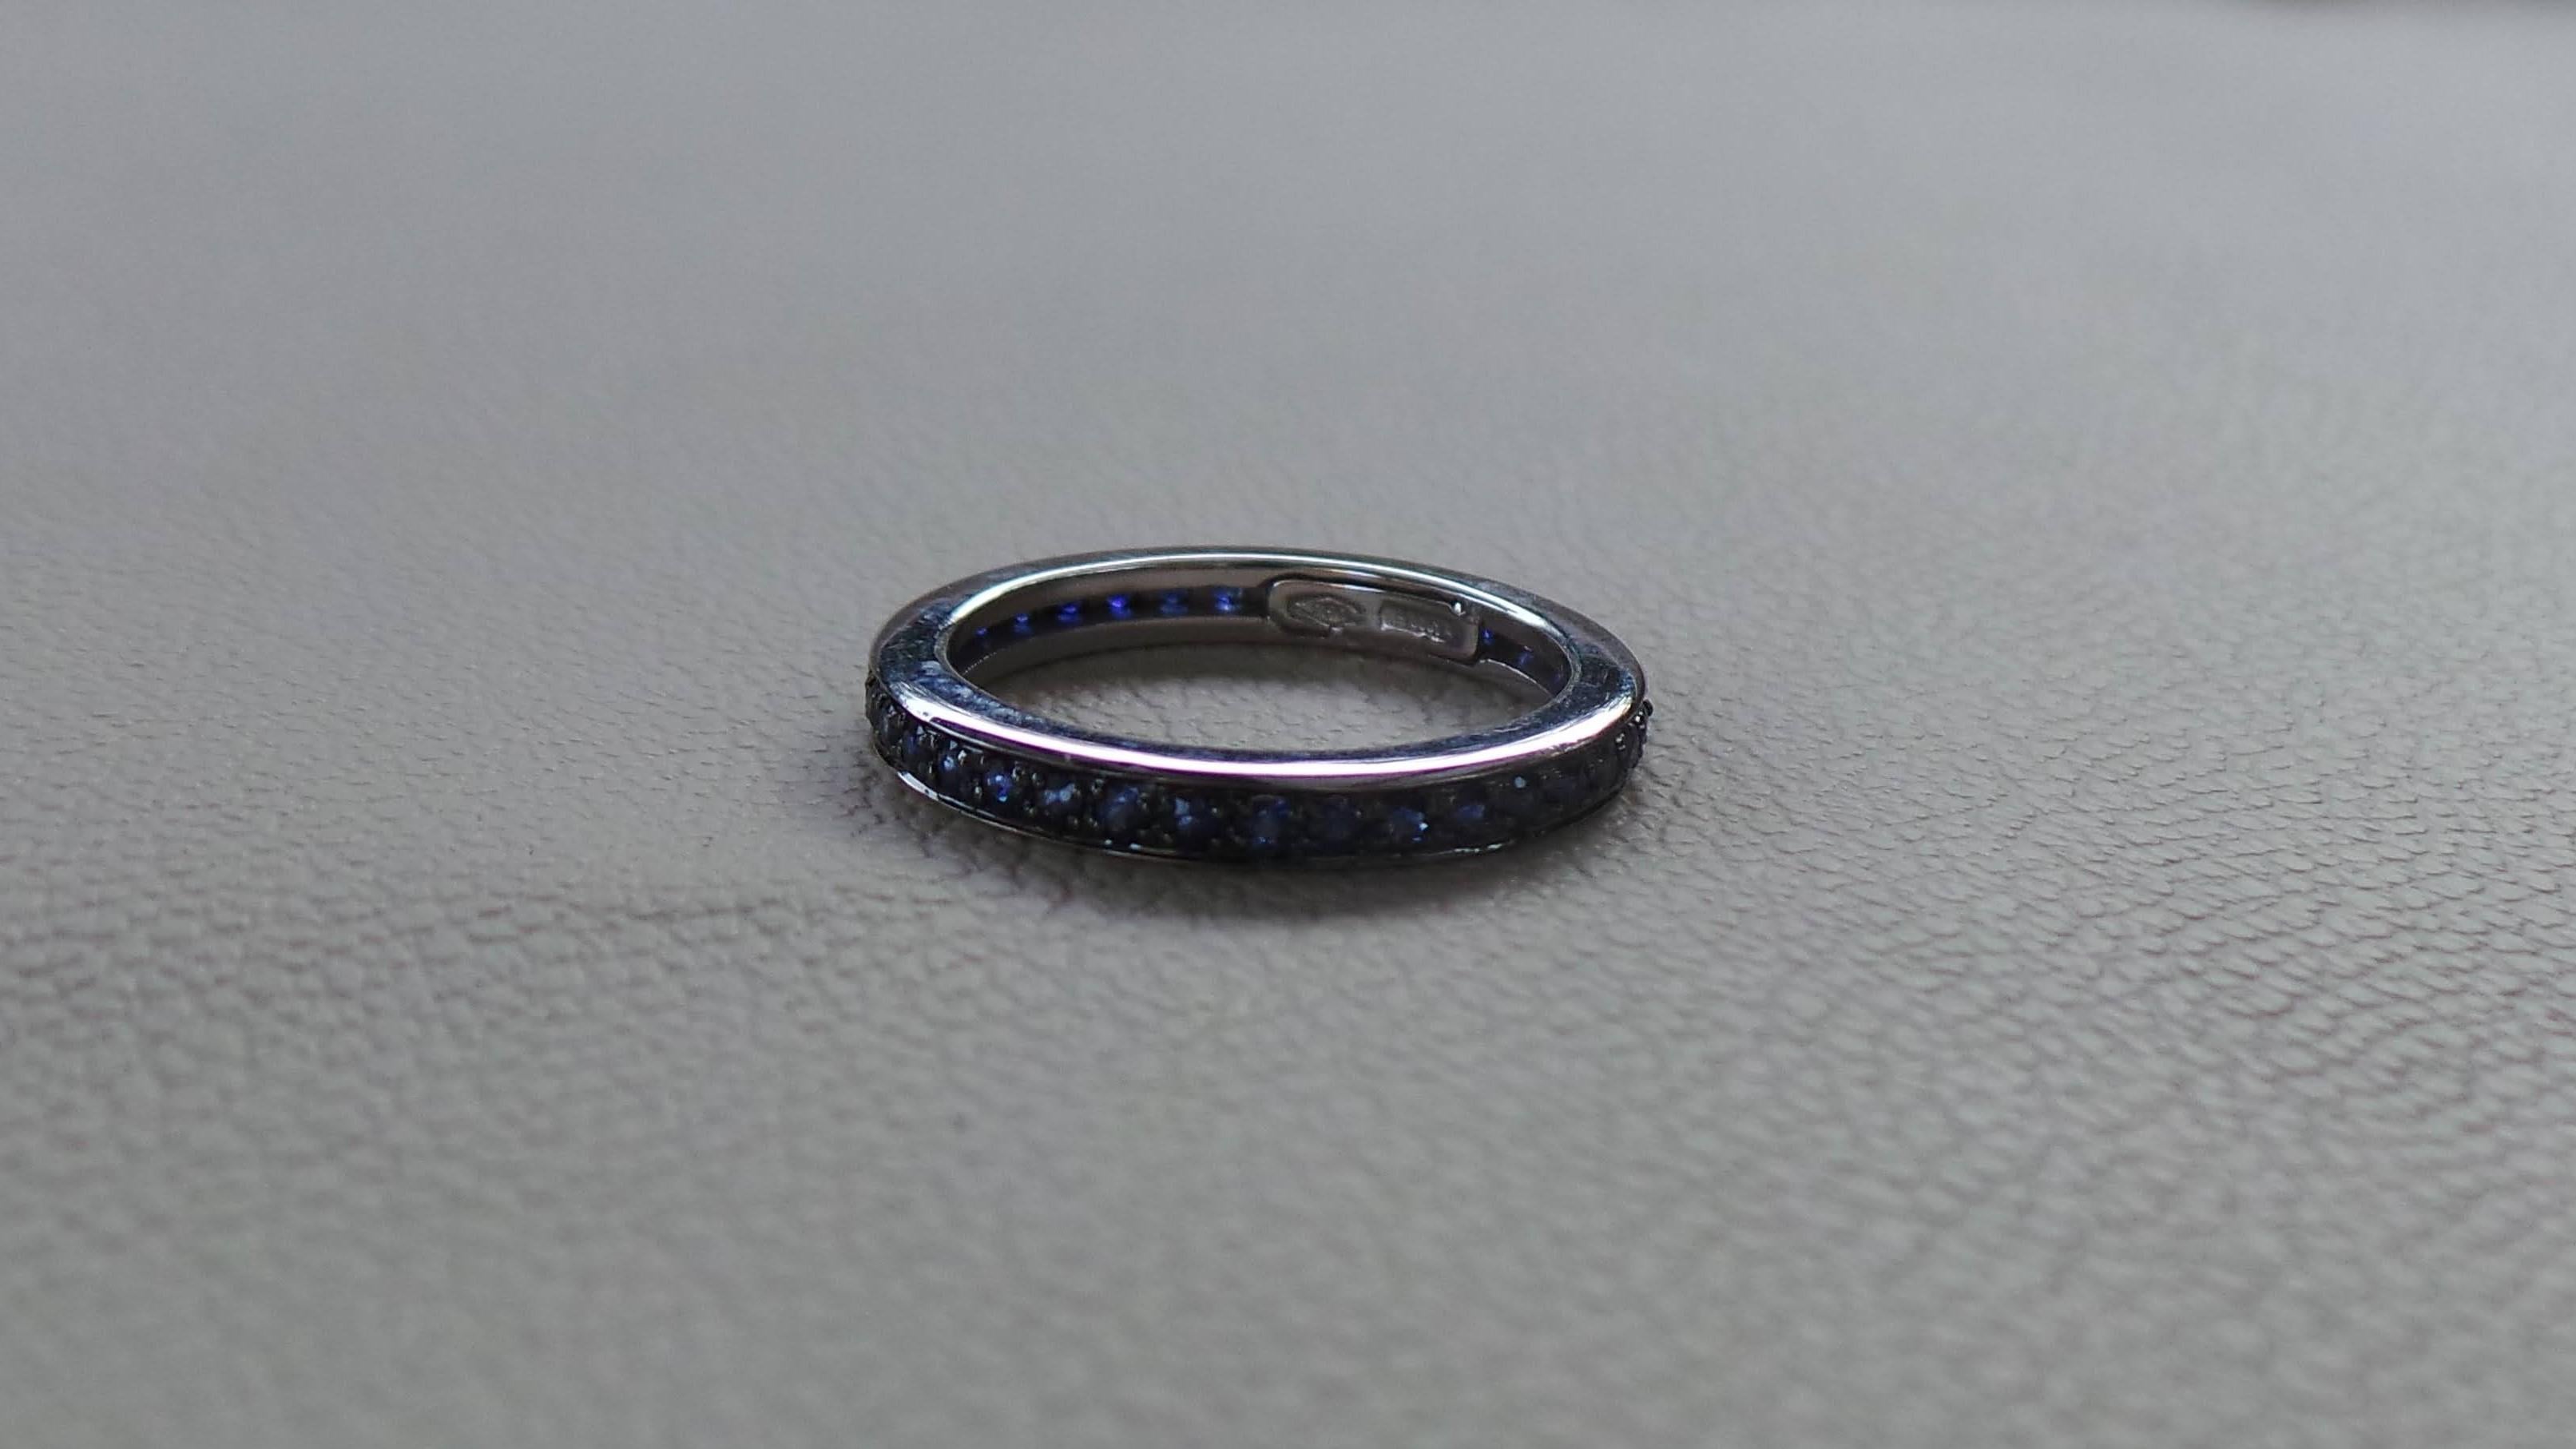 Andrea Macinai design a dedicated collection for stackable rings.  
The eternity ring has sapphires all the way around the band.
Round sapphires cut brillant total 0.80 carats.
We're a workshop so every piece is handmade, customizable and resizable.